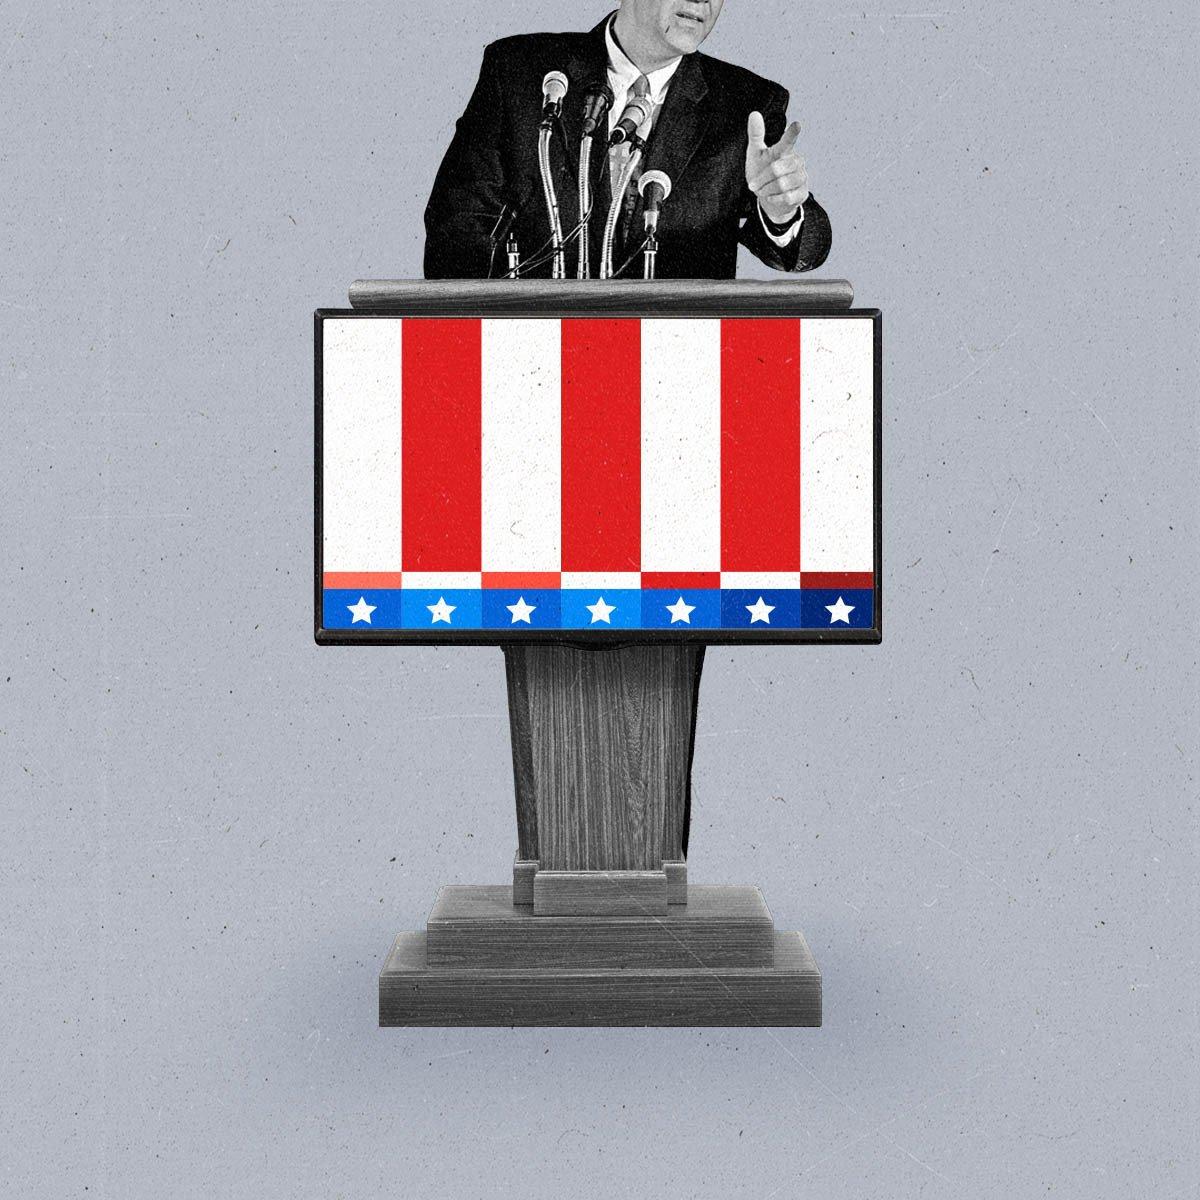 A man in a suit speaks into microphones on a podium that displays a connected TV with a red, white and blue test pattern.